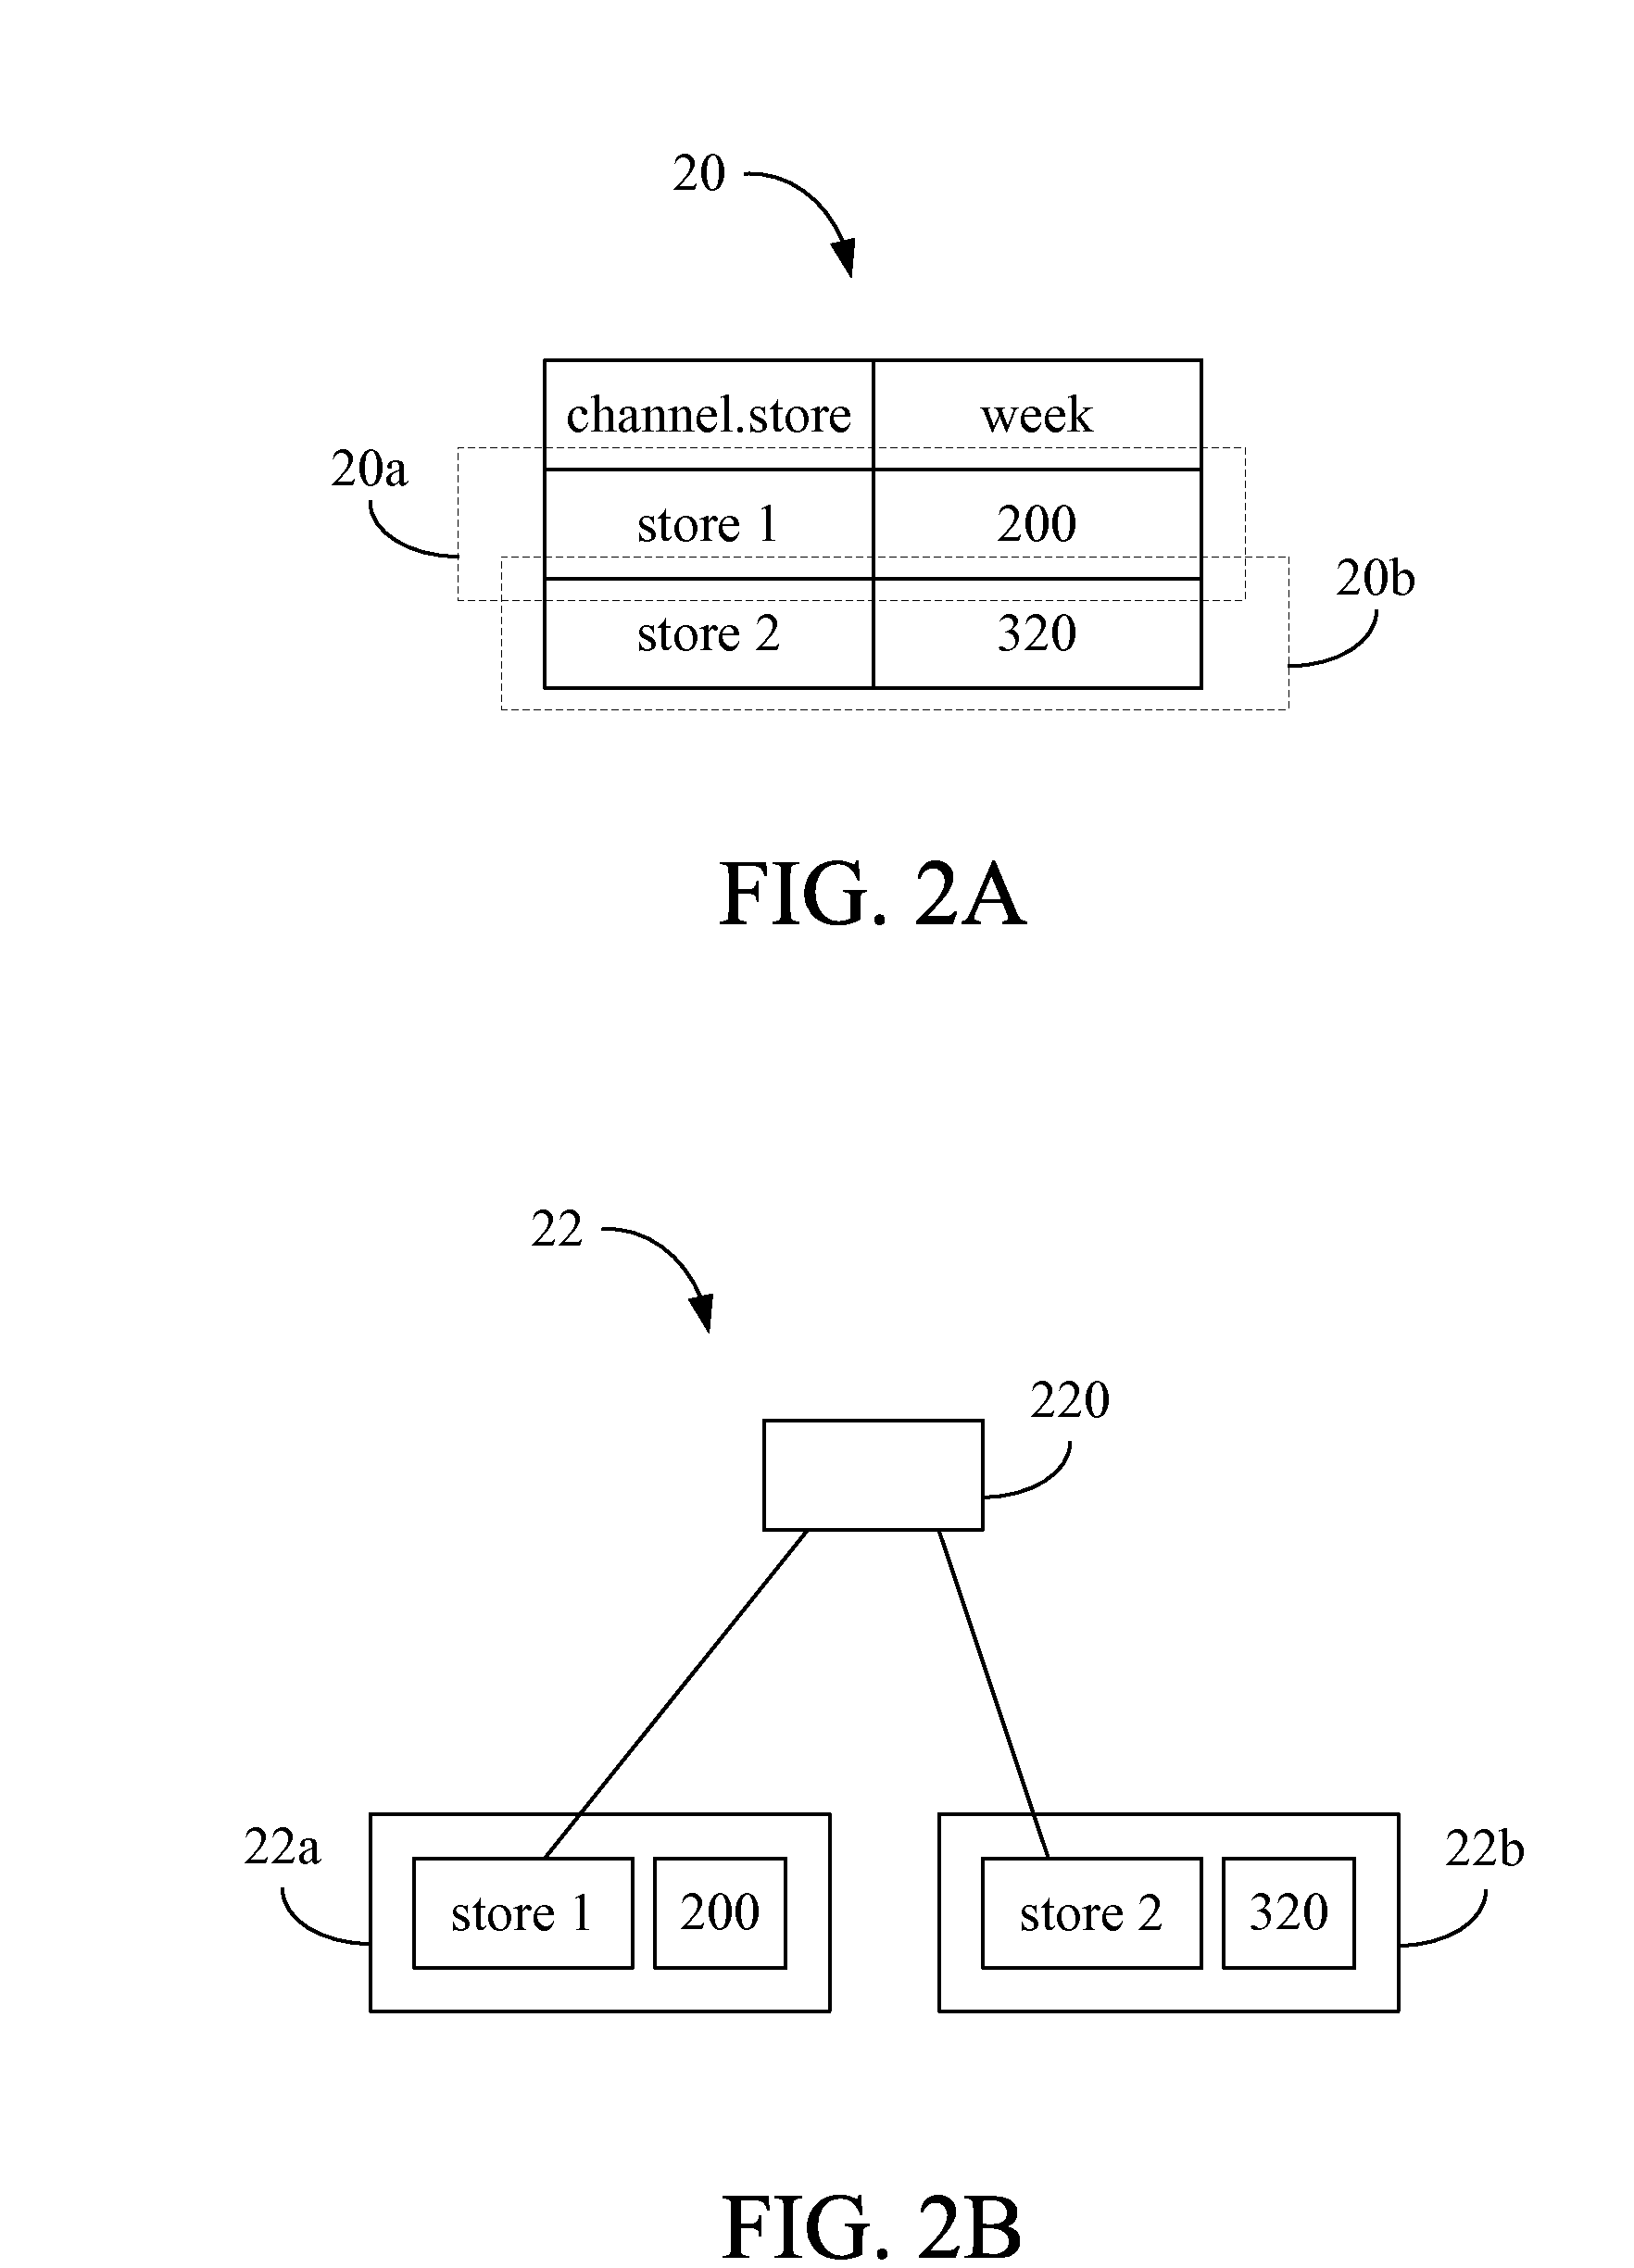 Large-scale data processing apparatus, method, and non-transitory tangible machine-readable medium thereof